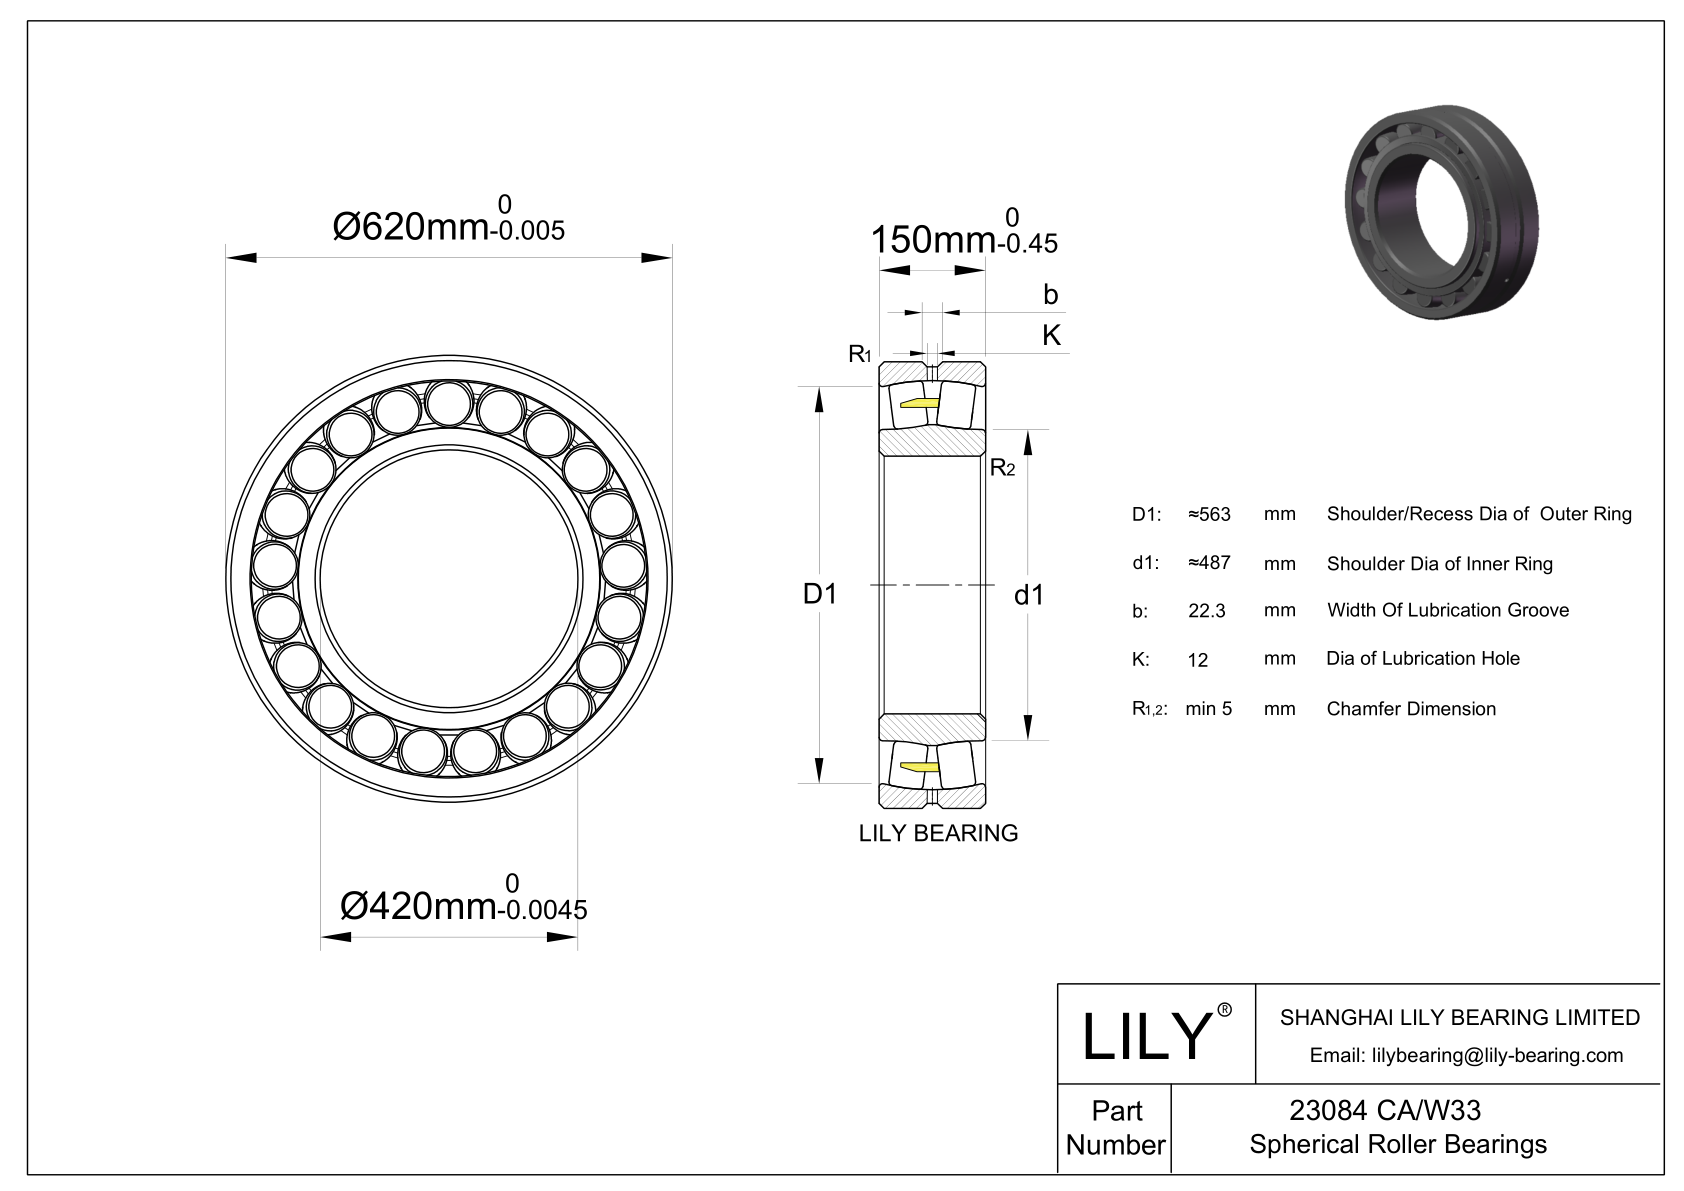 23084 CA/W33 Double Row Spherical Roller Bearing cad drawing